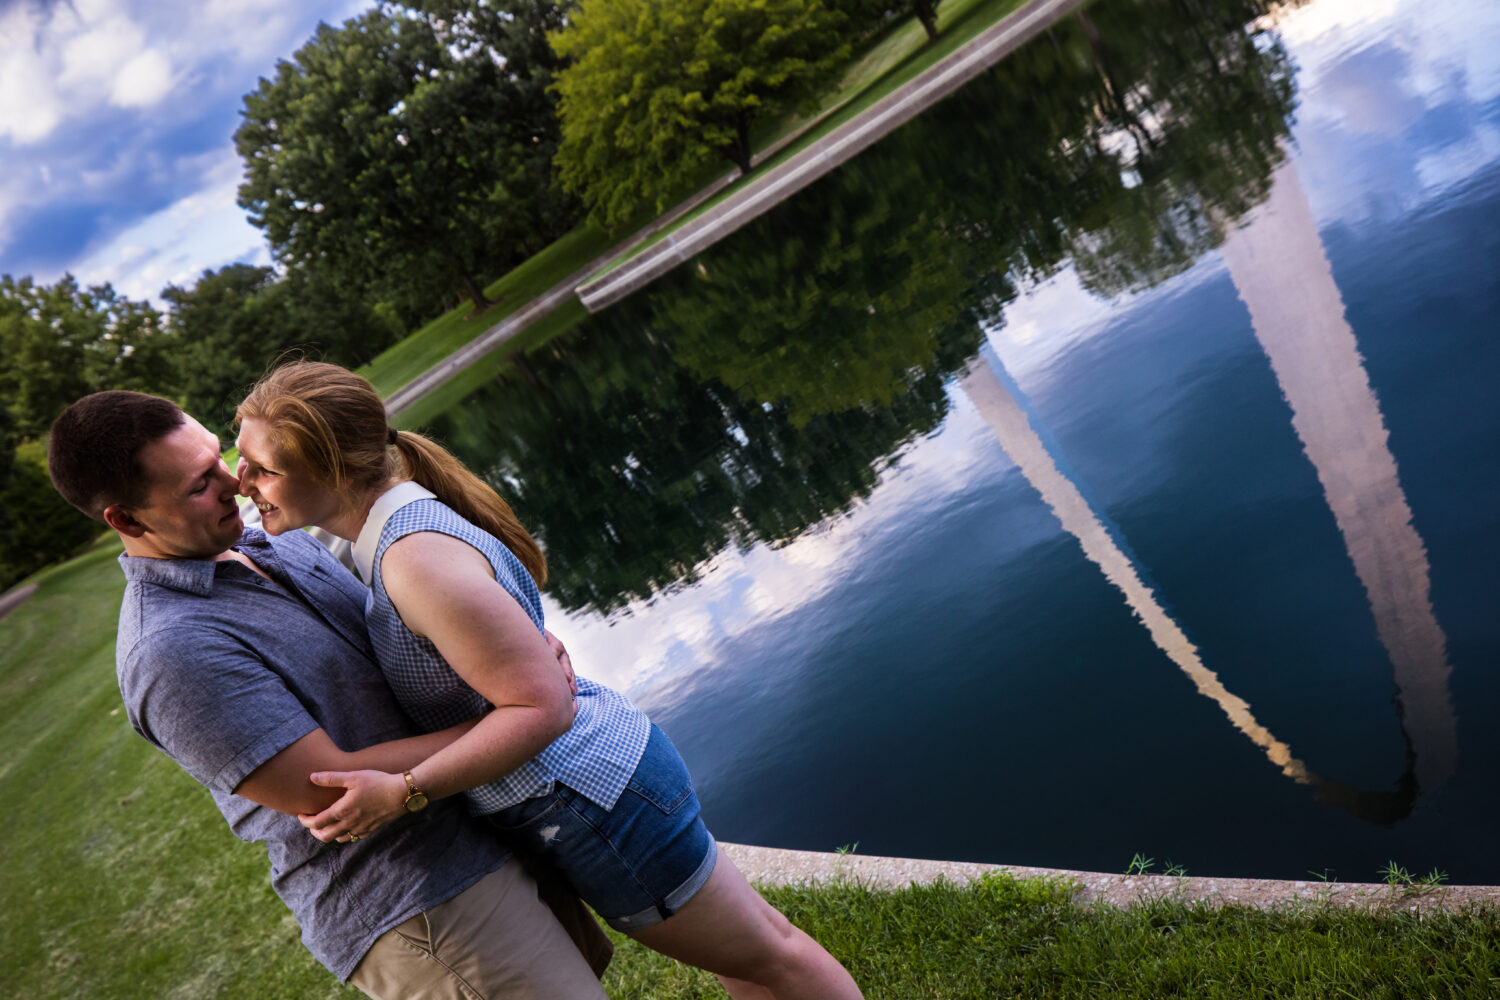 Creative Proposal Photographer, lisa rhinehart, capture this creative, unique, fun image of the couple as they hug and smile at each other with the archway in the background behind them captured in the reflection of the pond behind them 